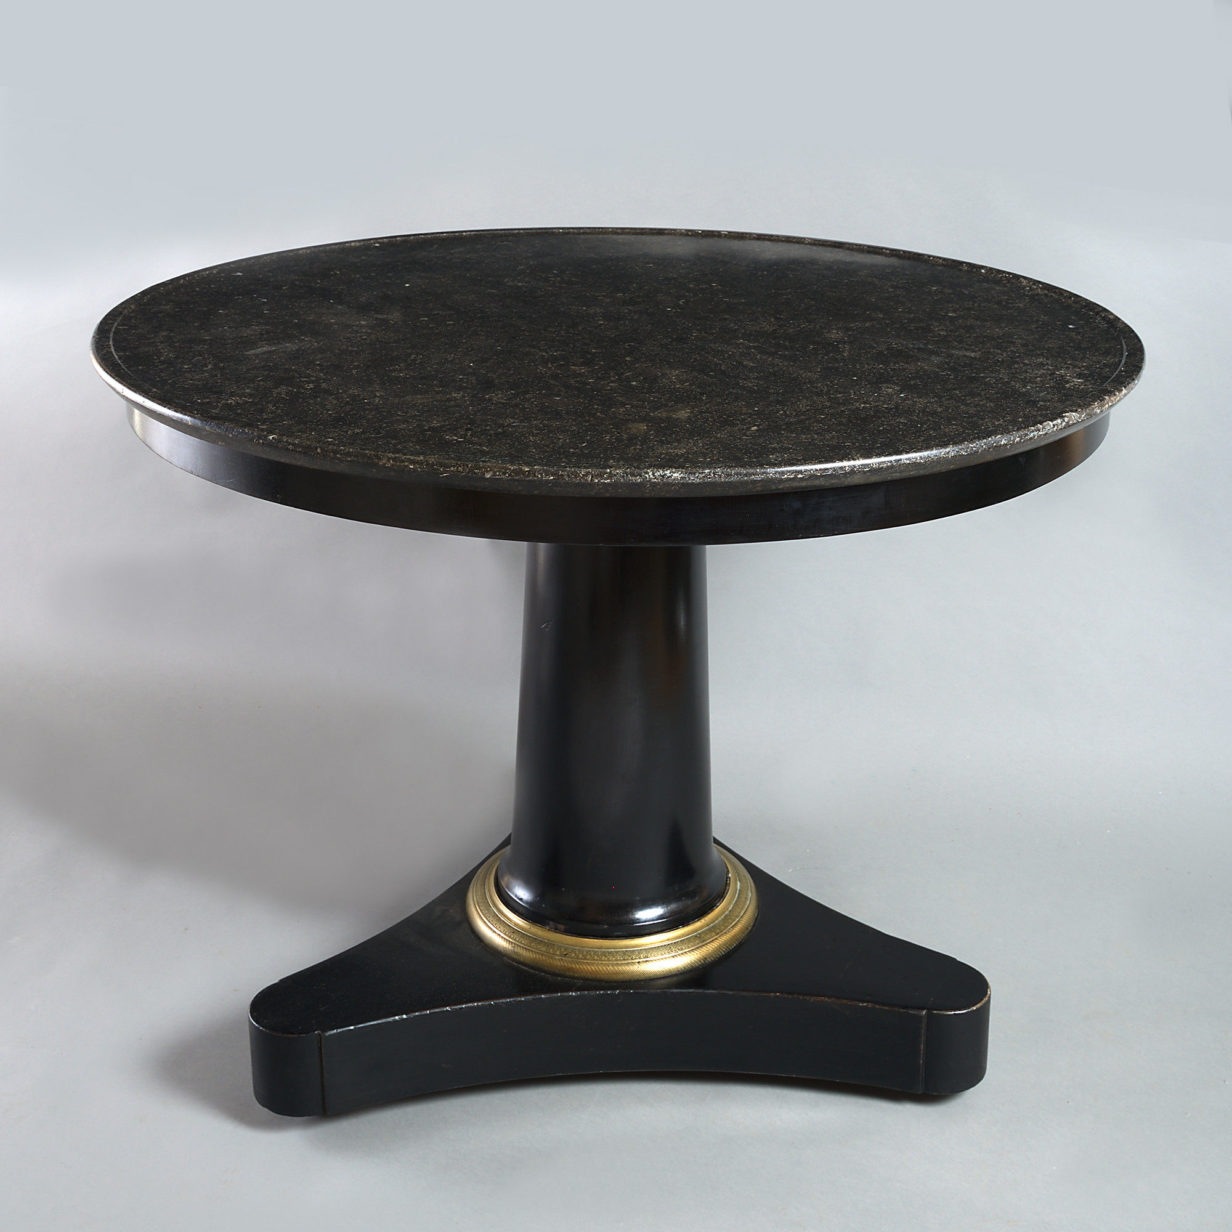 Early 19th century empire period ebonised circular centre table